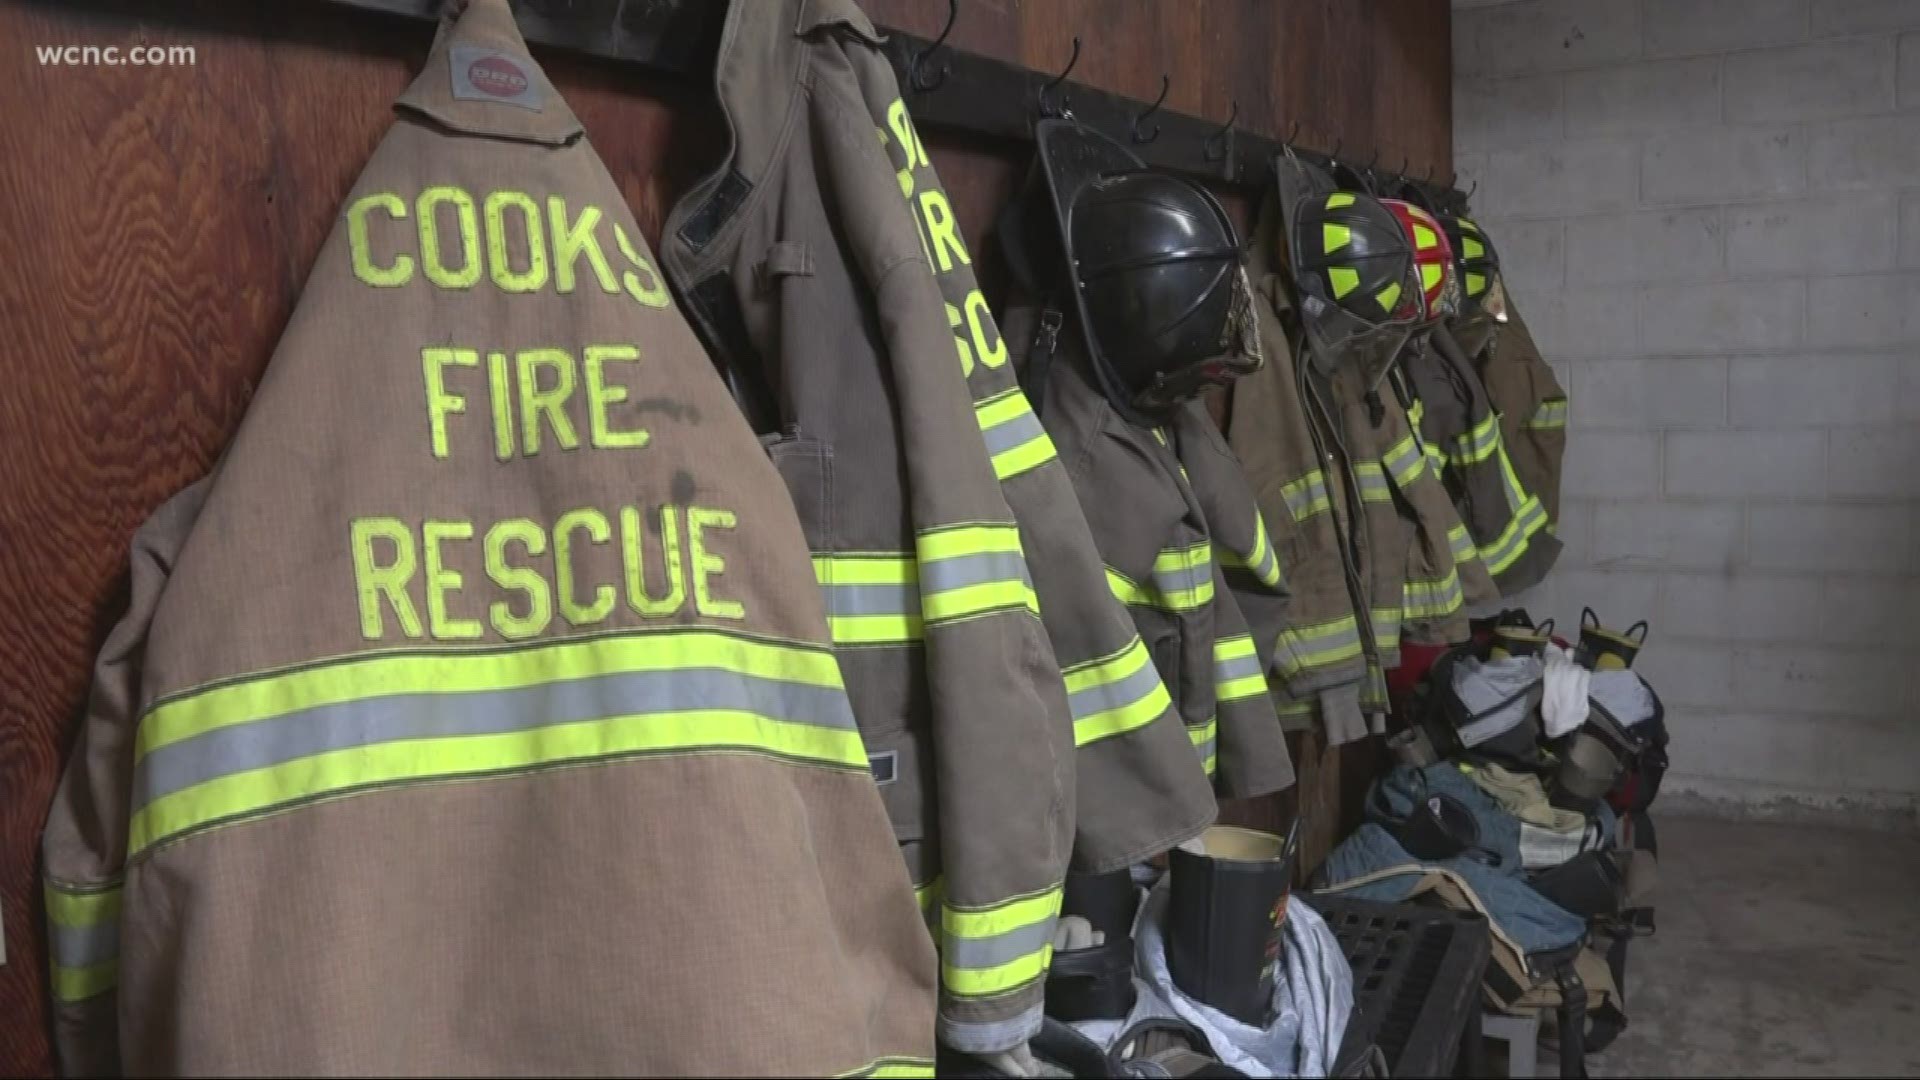 After a long history serving in our area, the Cook’s Community Volunteer Fire Department in northeast Charlotte is at risk of losing its funding.